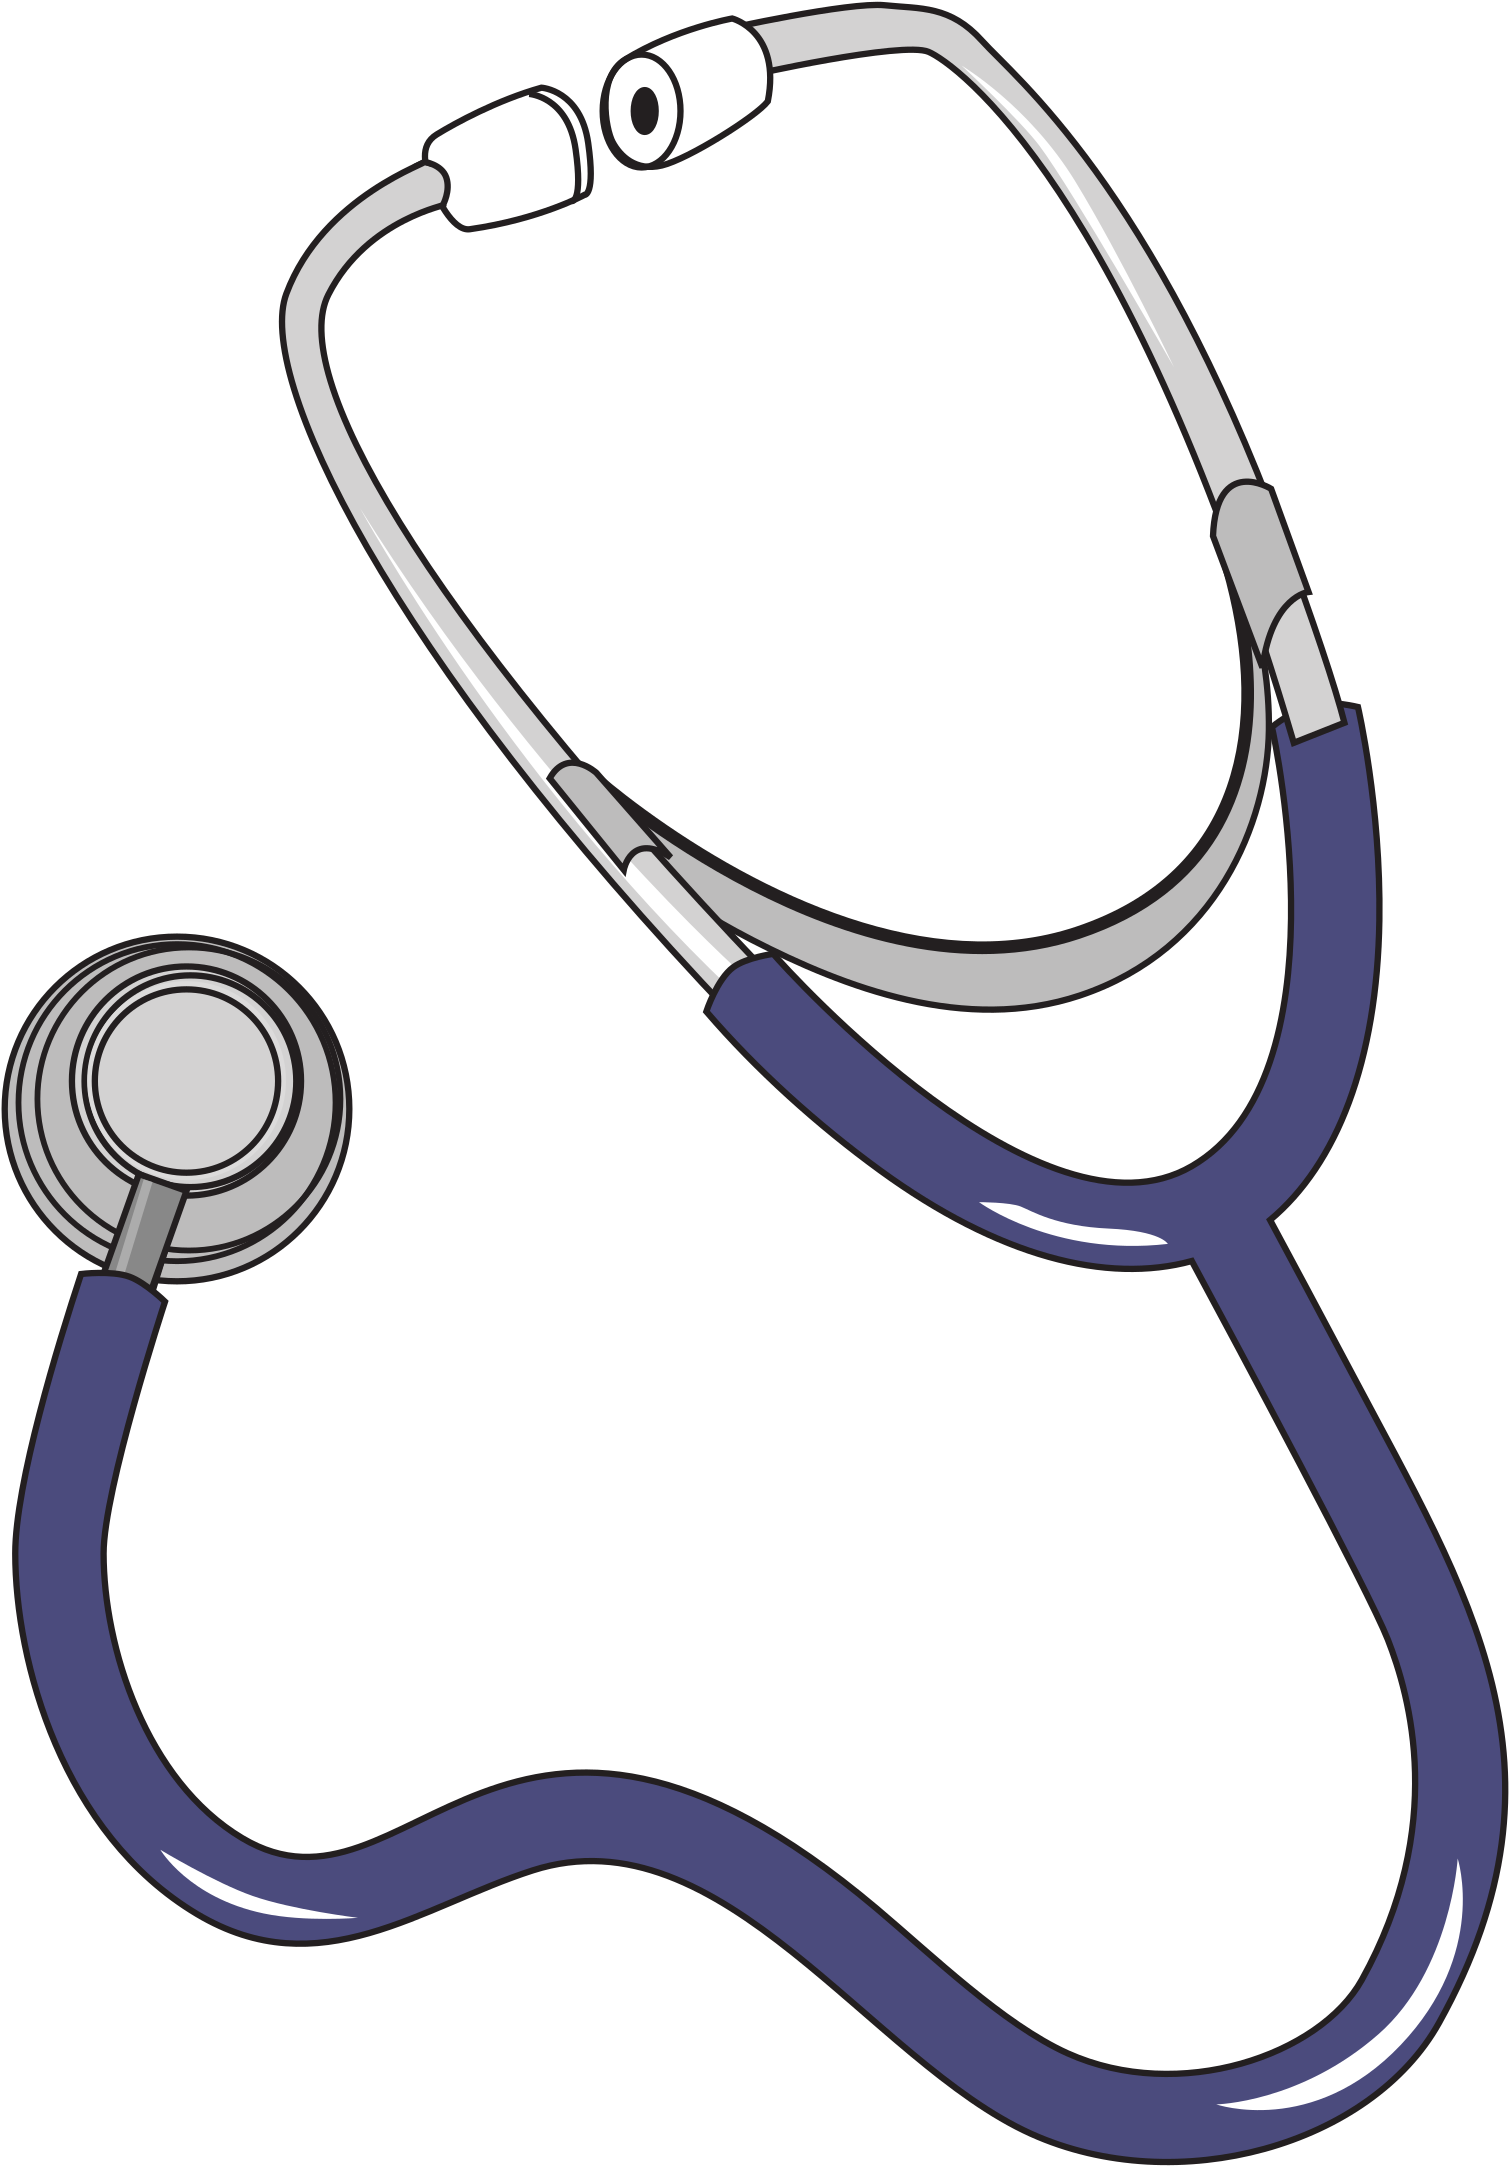 With Heart Black And Stethoscope Clip Art